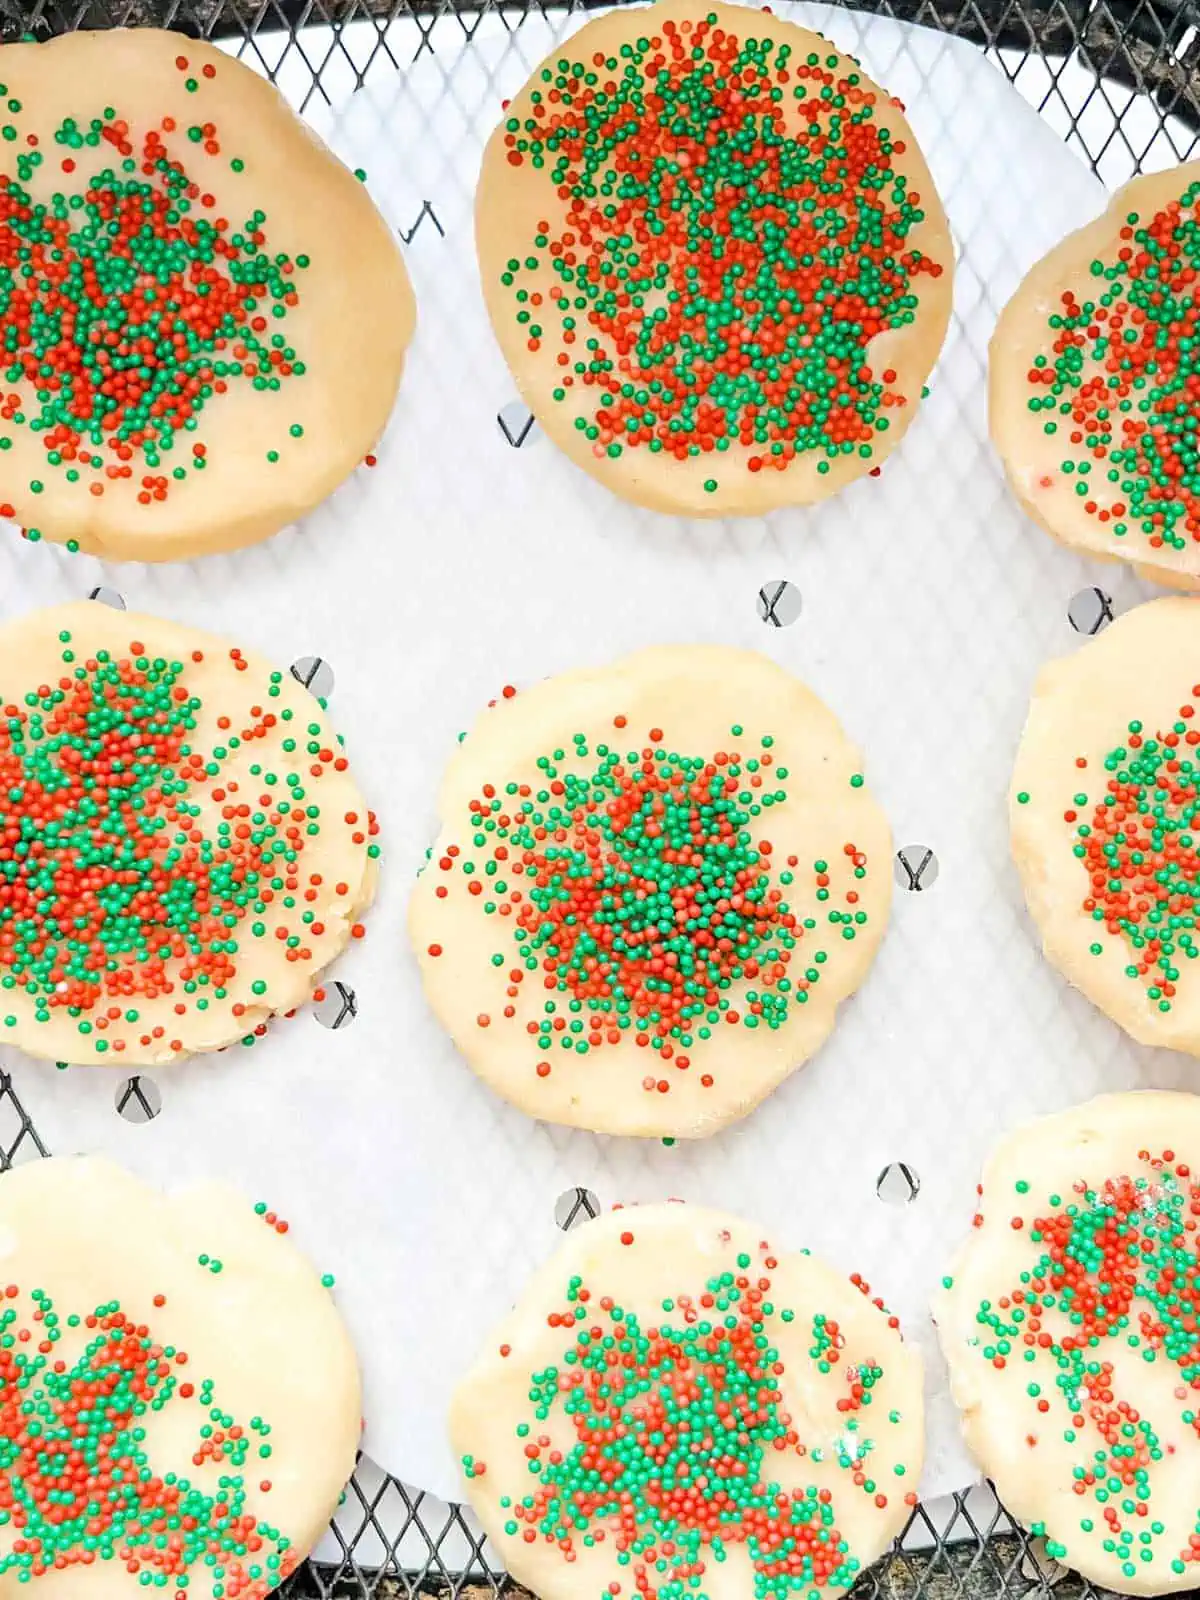 Photo of sugar cookies in an air fryer basket ready to cook.